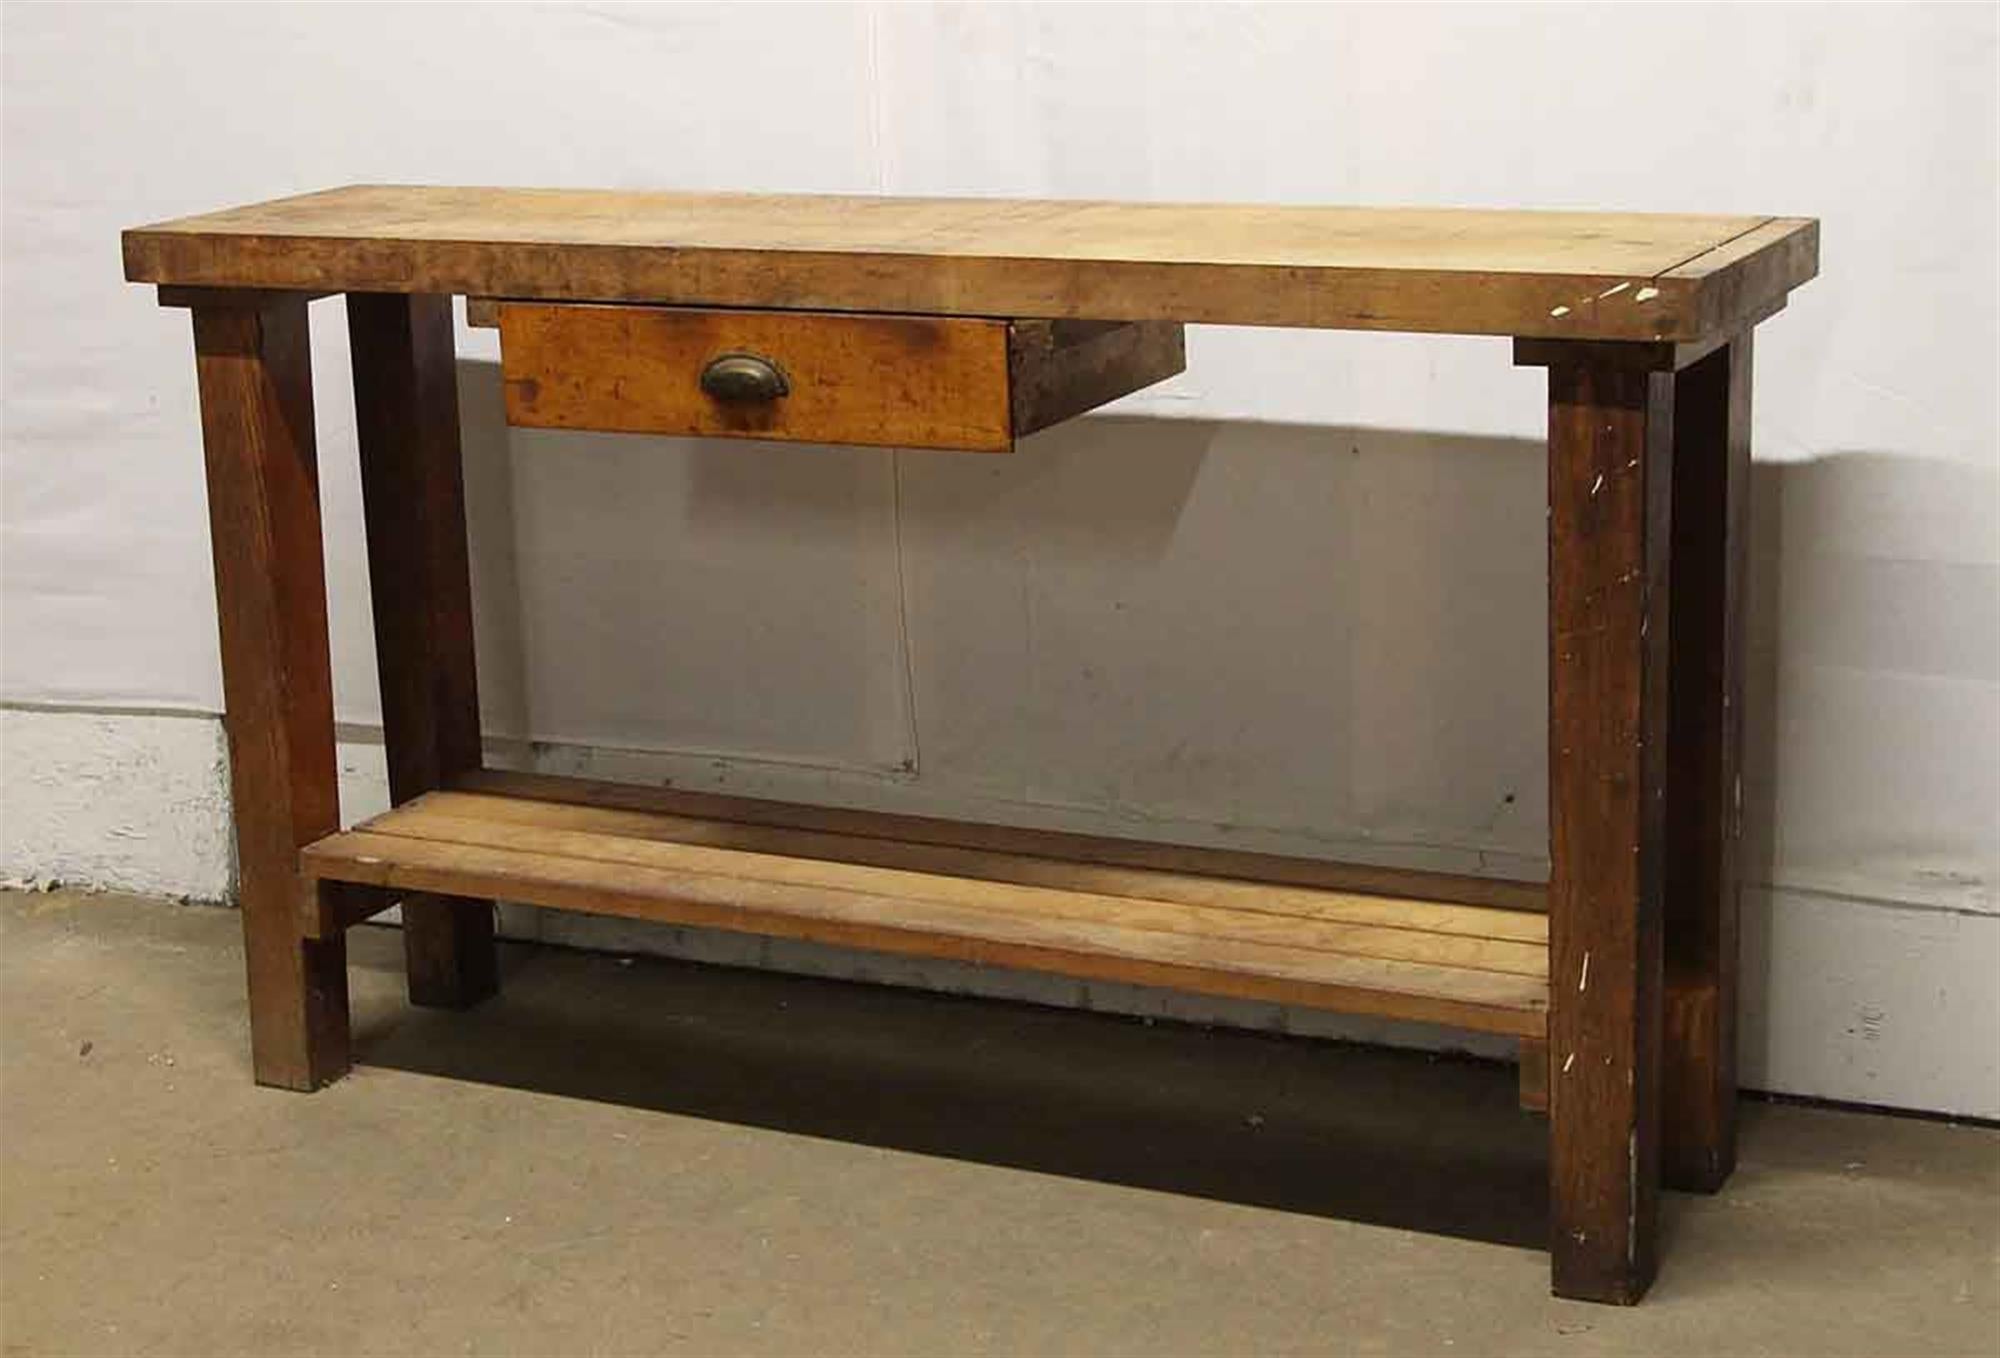 Industrial 1950s Original Distressed Wood Work Bench with Drawer and Lower Shelf